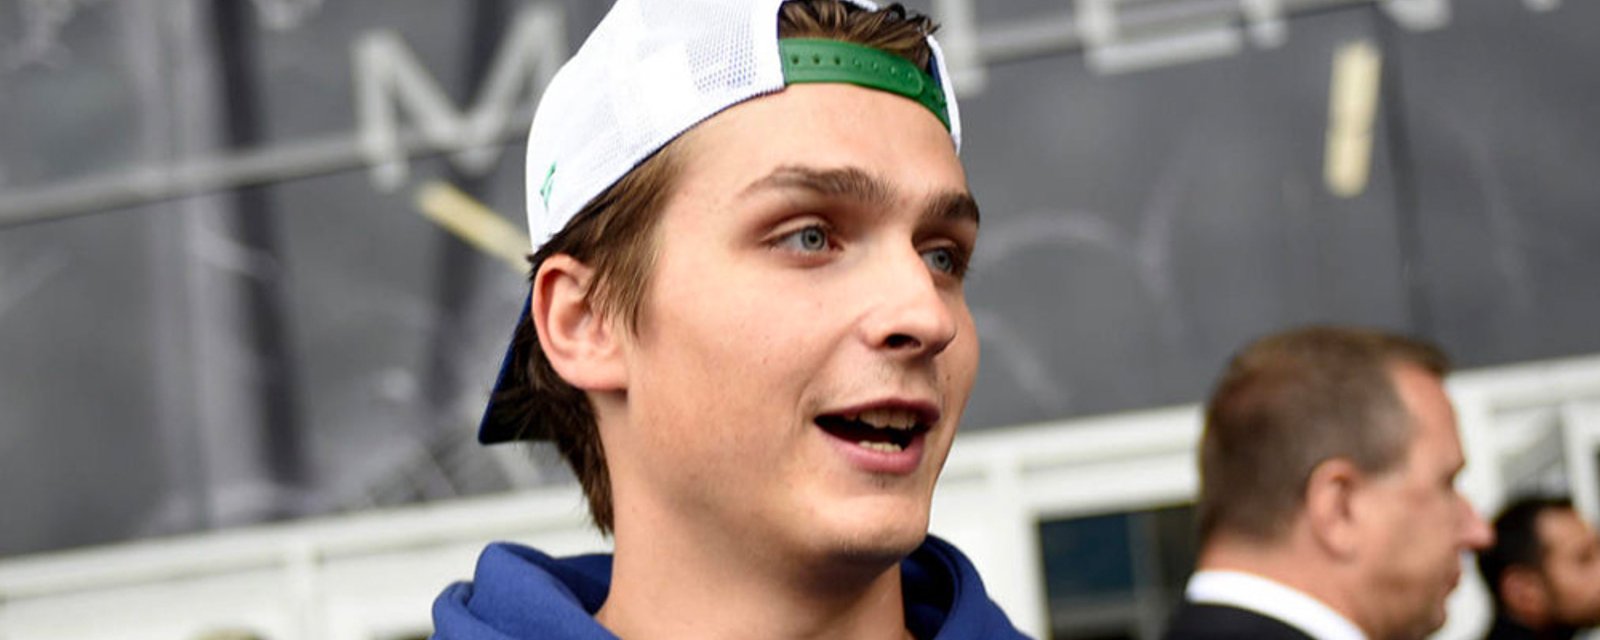 Jake Virtanen finally responds to allegations of sexual misconduct